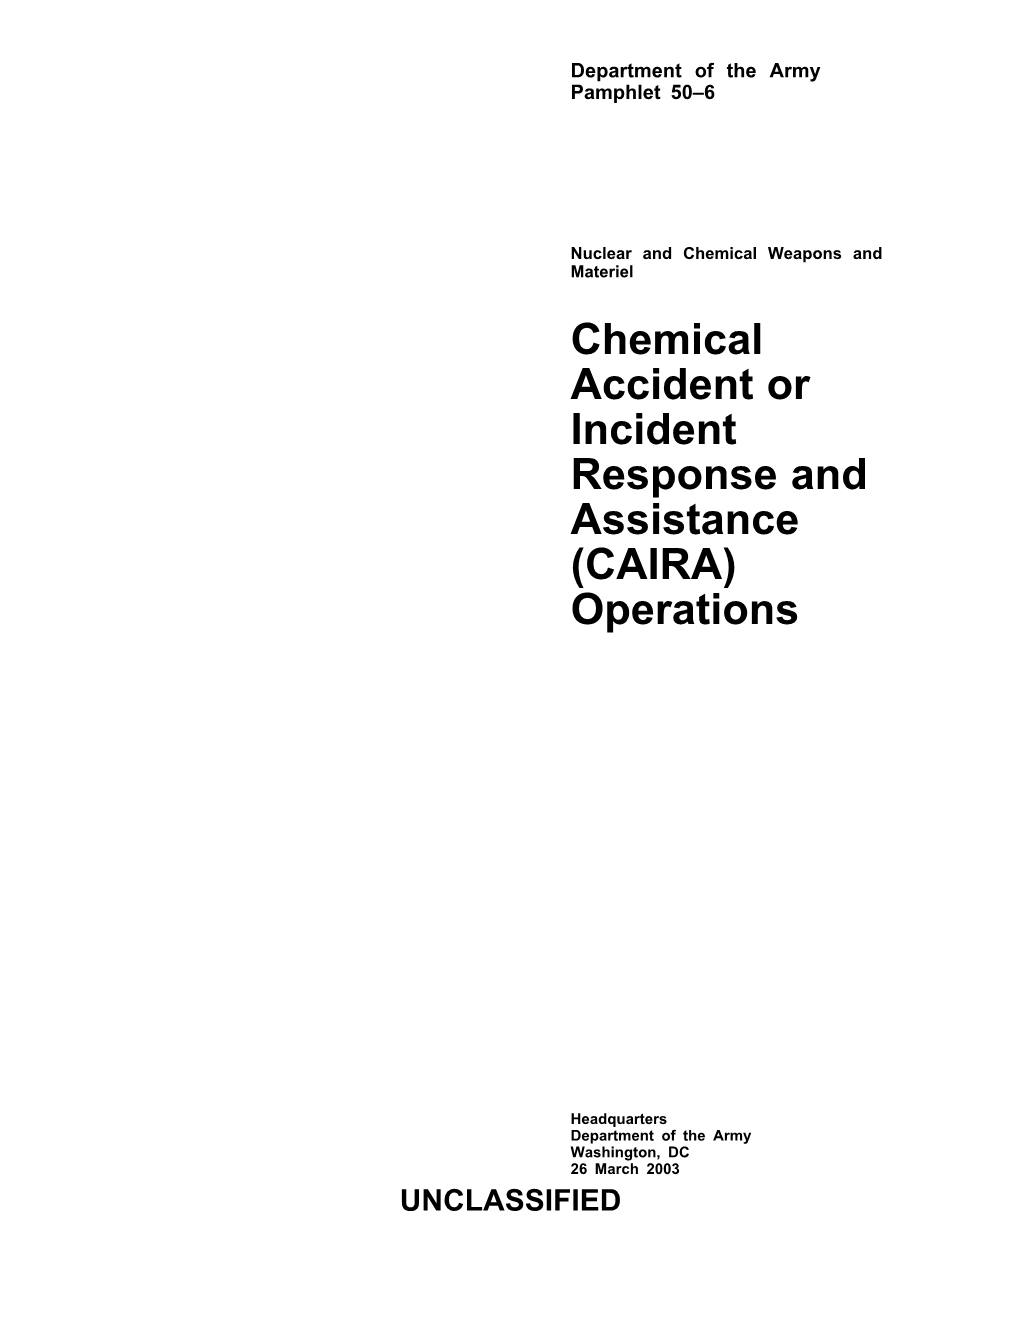 Chemical Accident Or Incident Response and Assistance (CAIRA) Operations